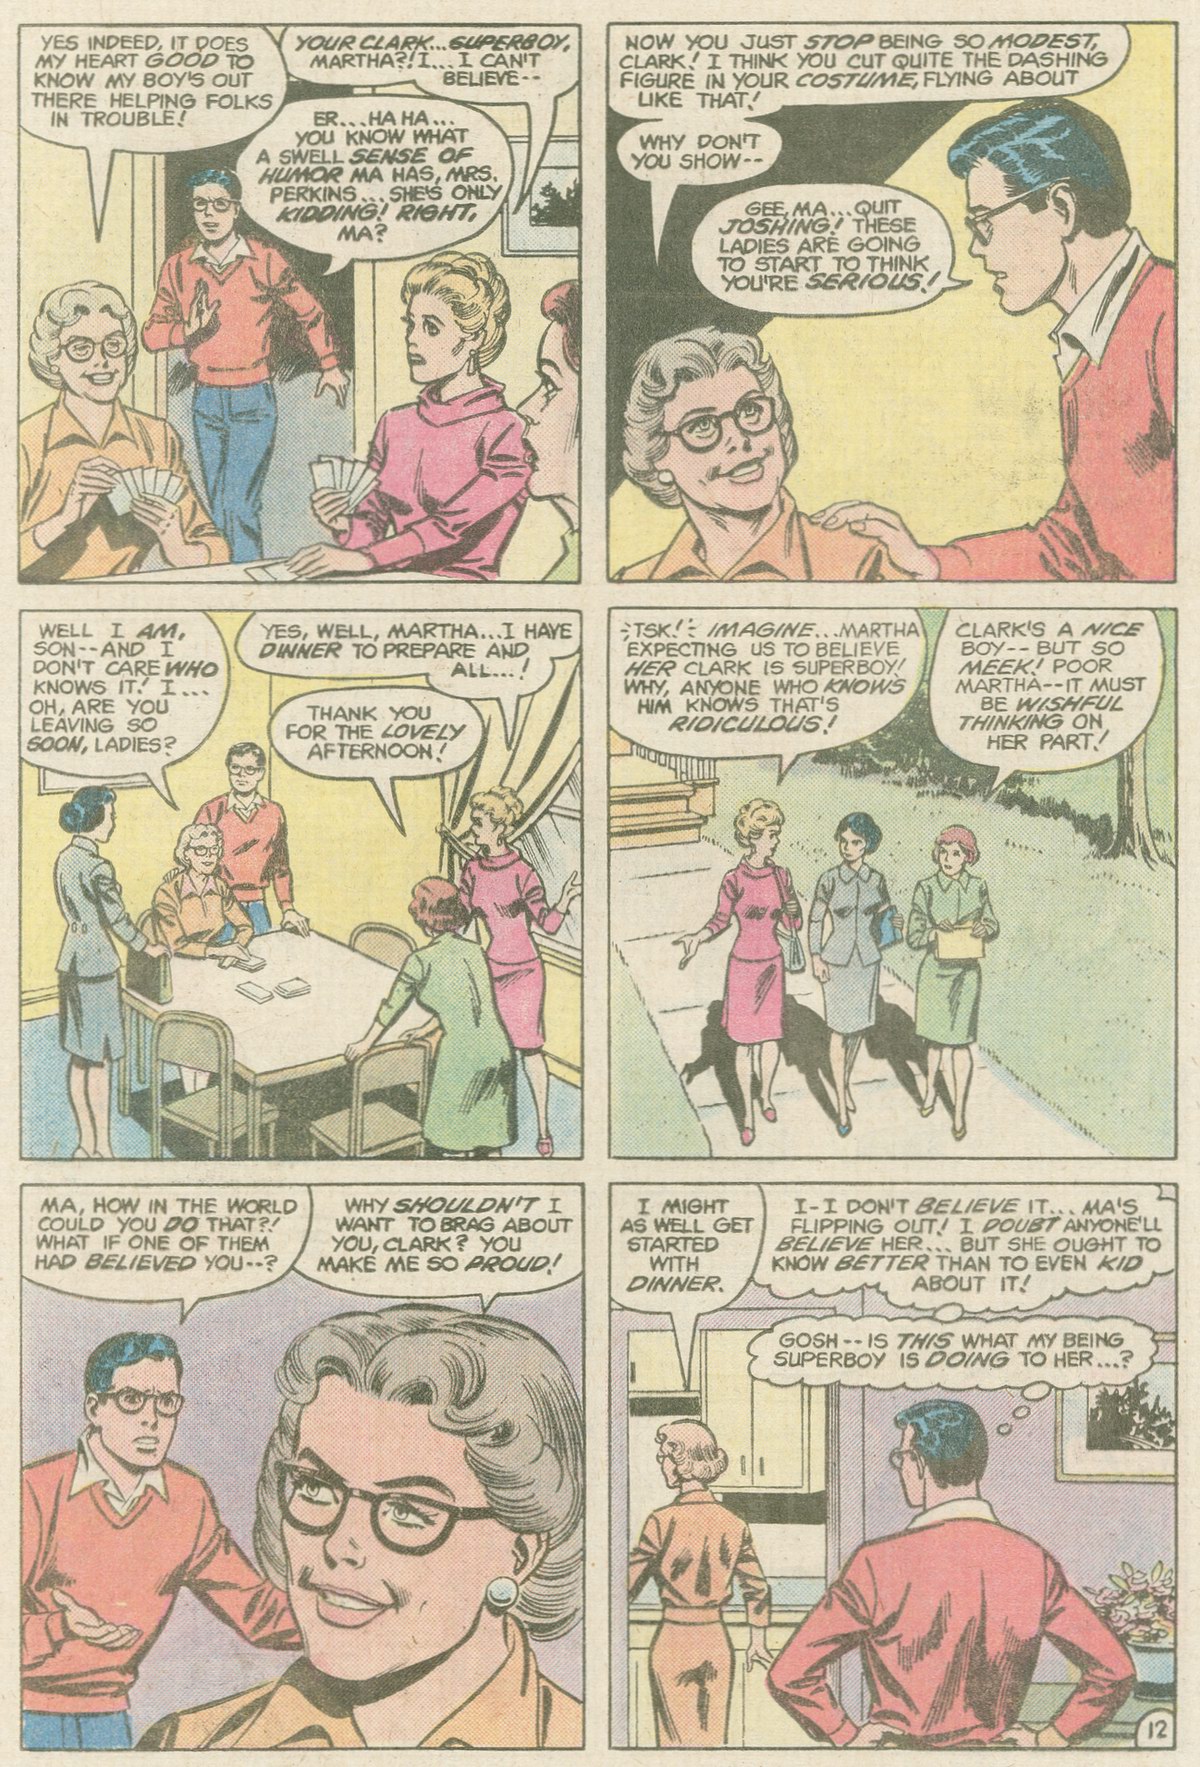 The New Adventures of Superboy 40 Page 12